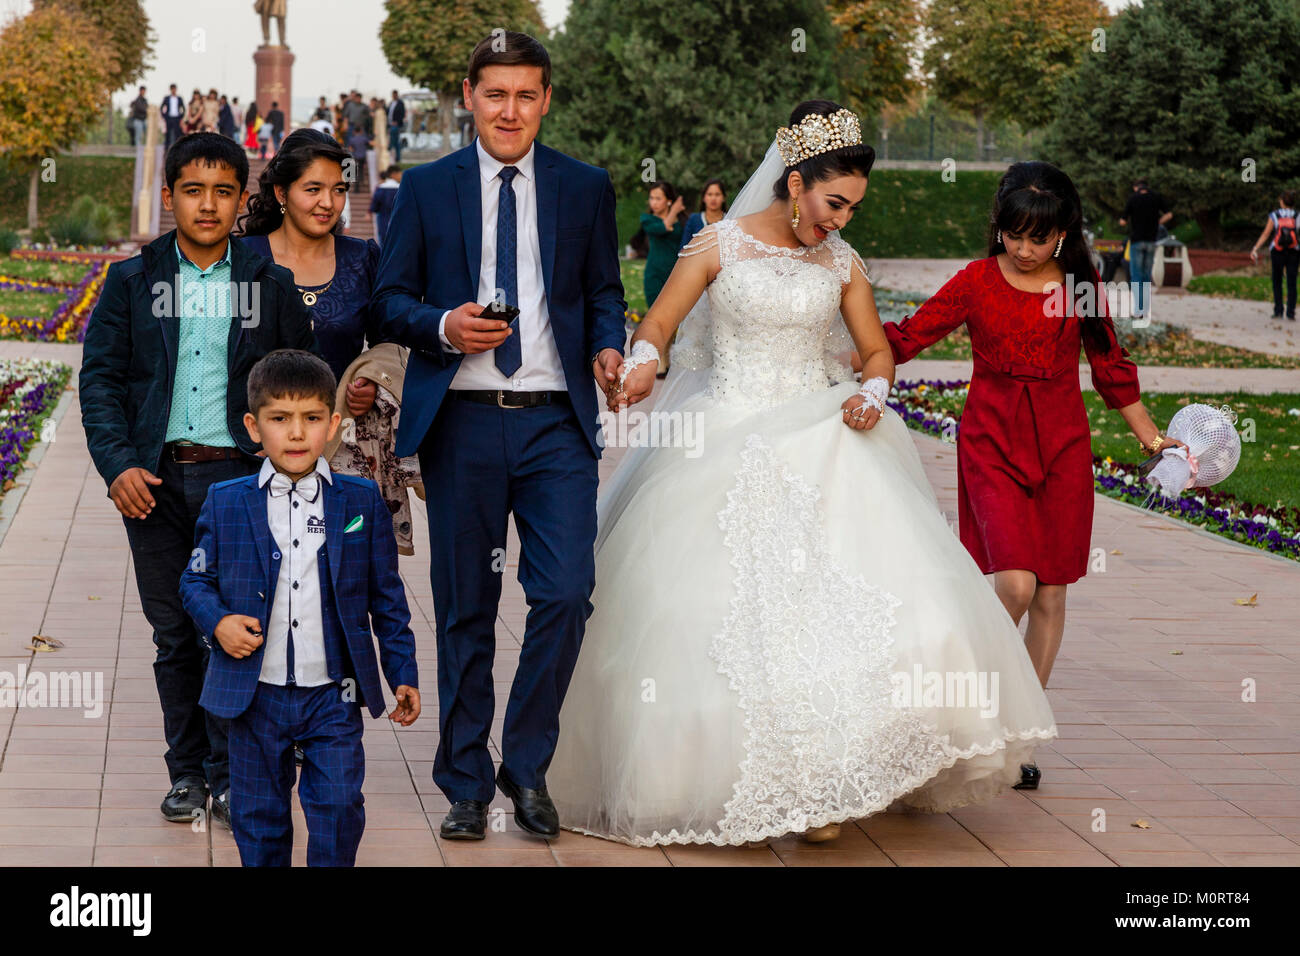 A ‘Just Married’ Young Couple Arrive At The Registan Complex For Their Wedding Photos, Samarkand, Uzbekistan Stock Photo